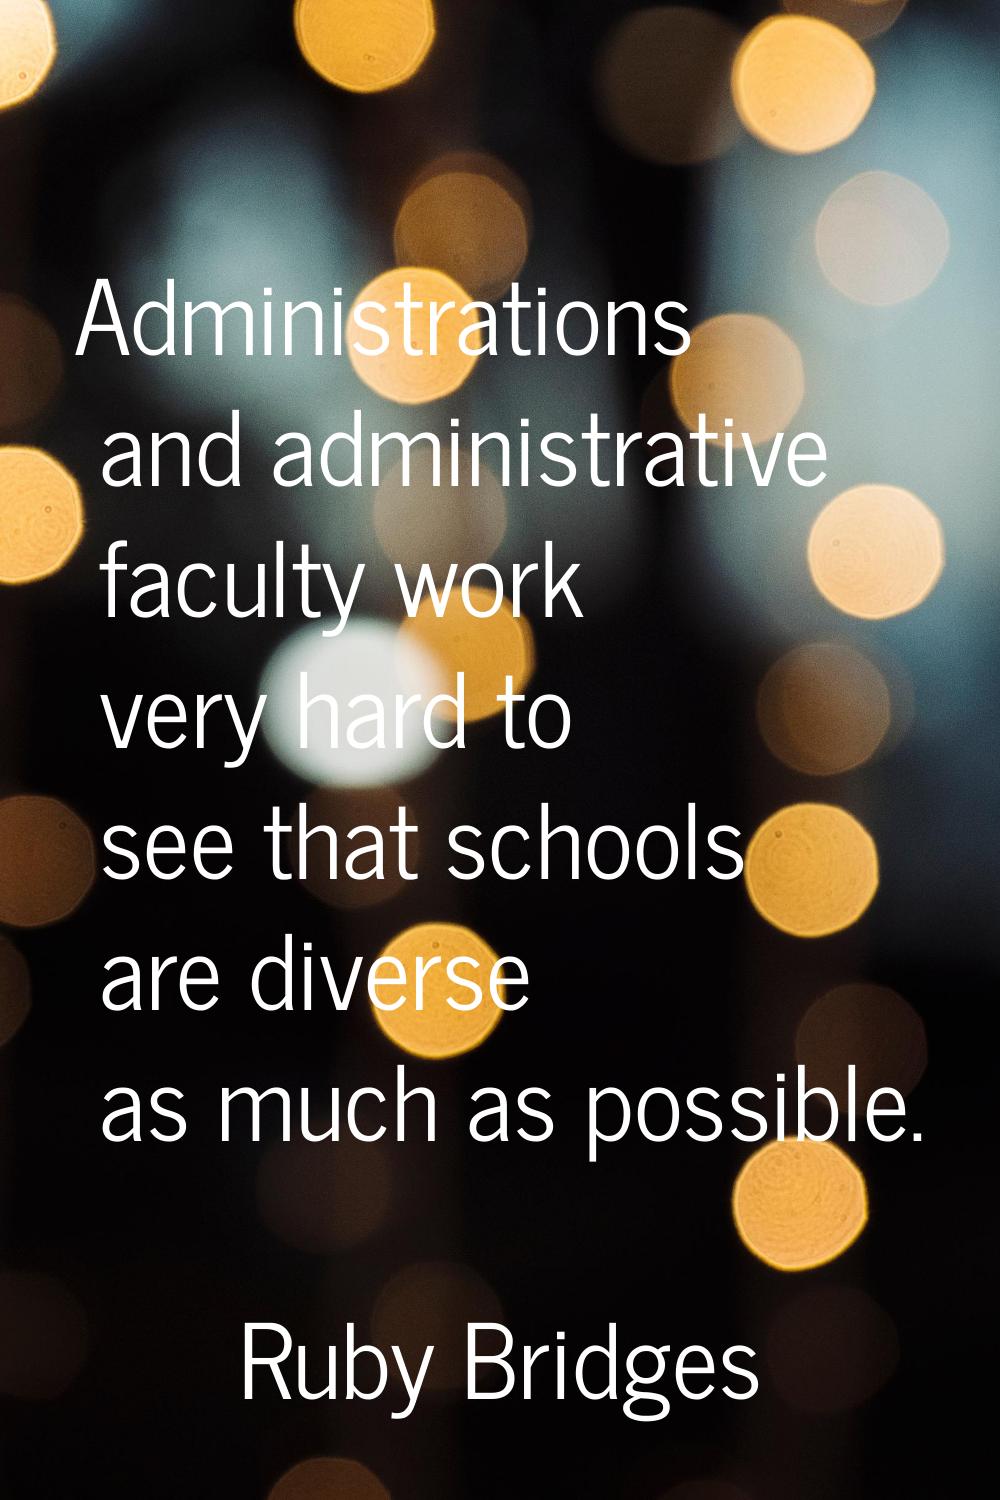 Administrations and administrative faculty work very hard to see that schools are diverse as much a